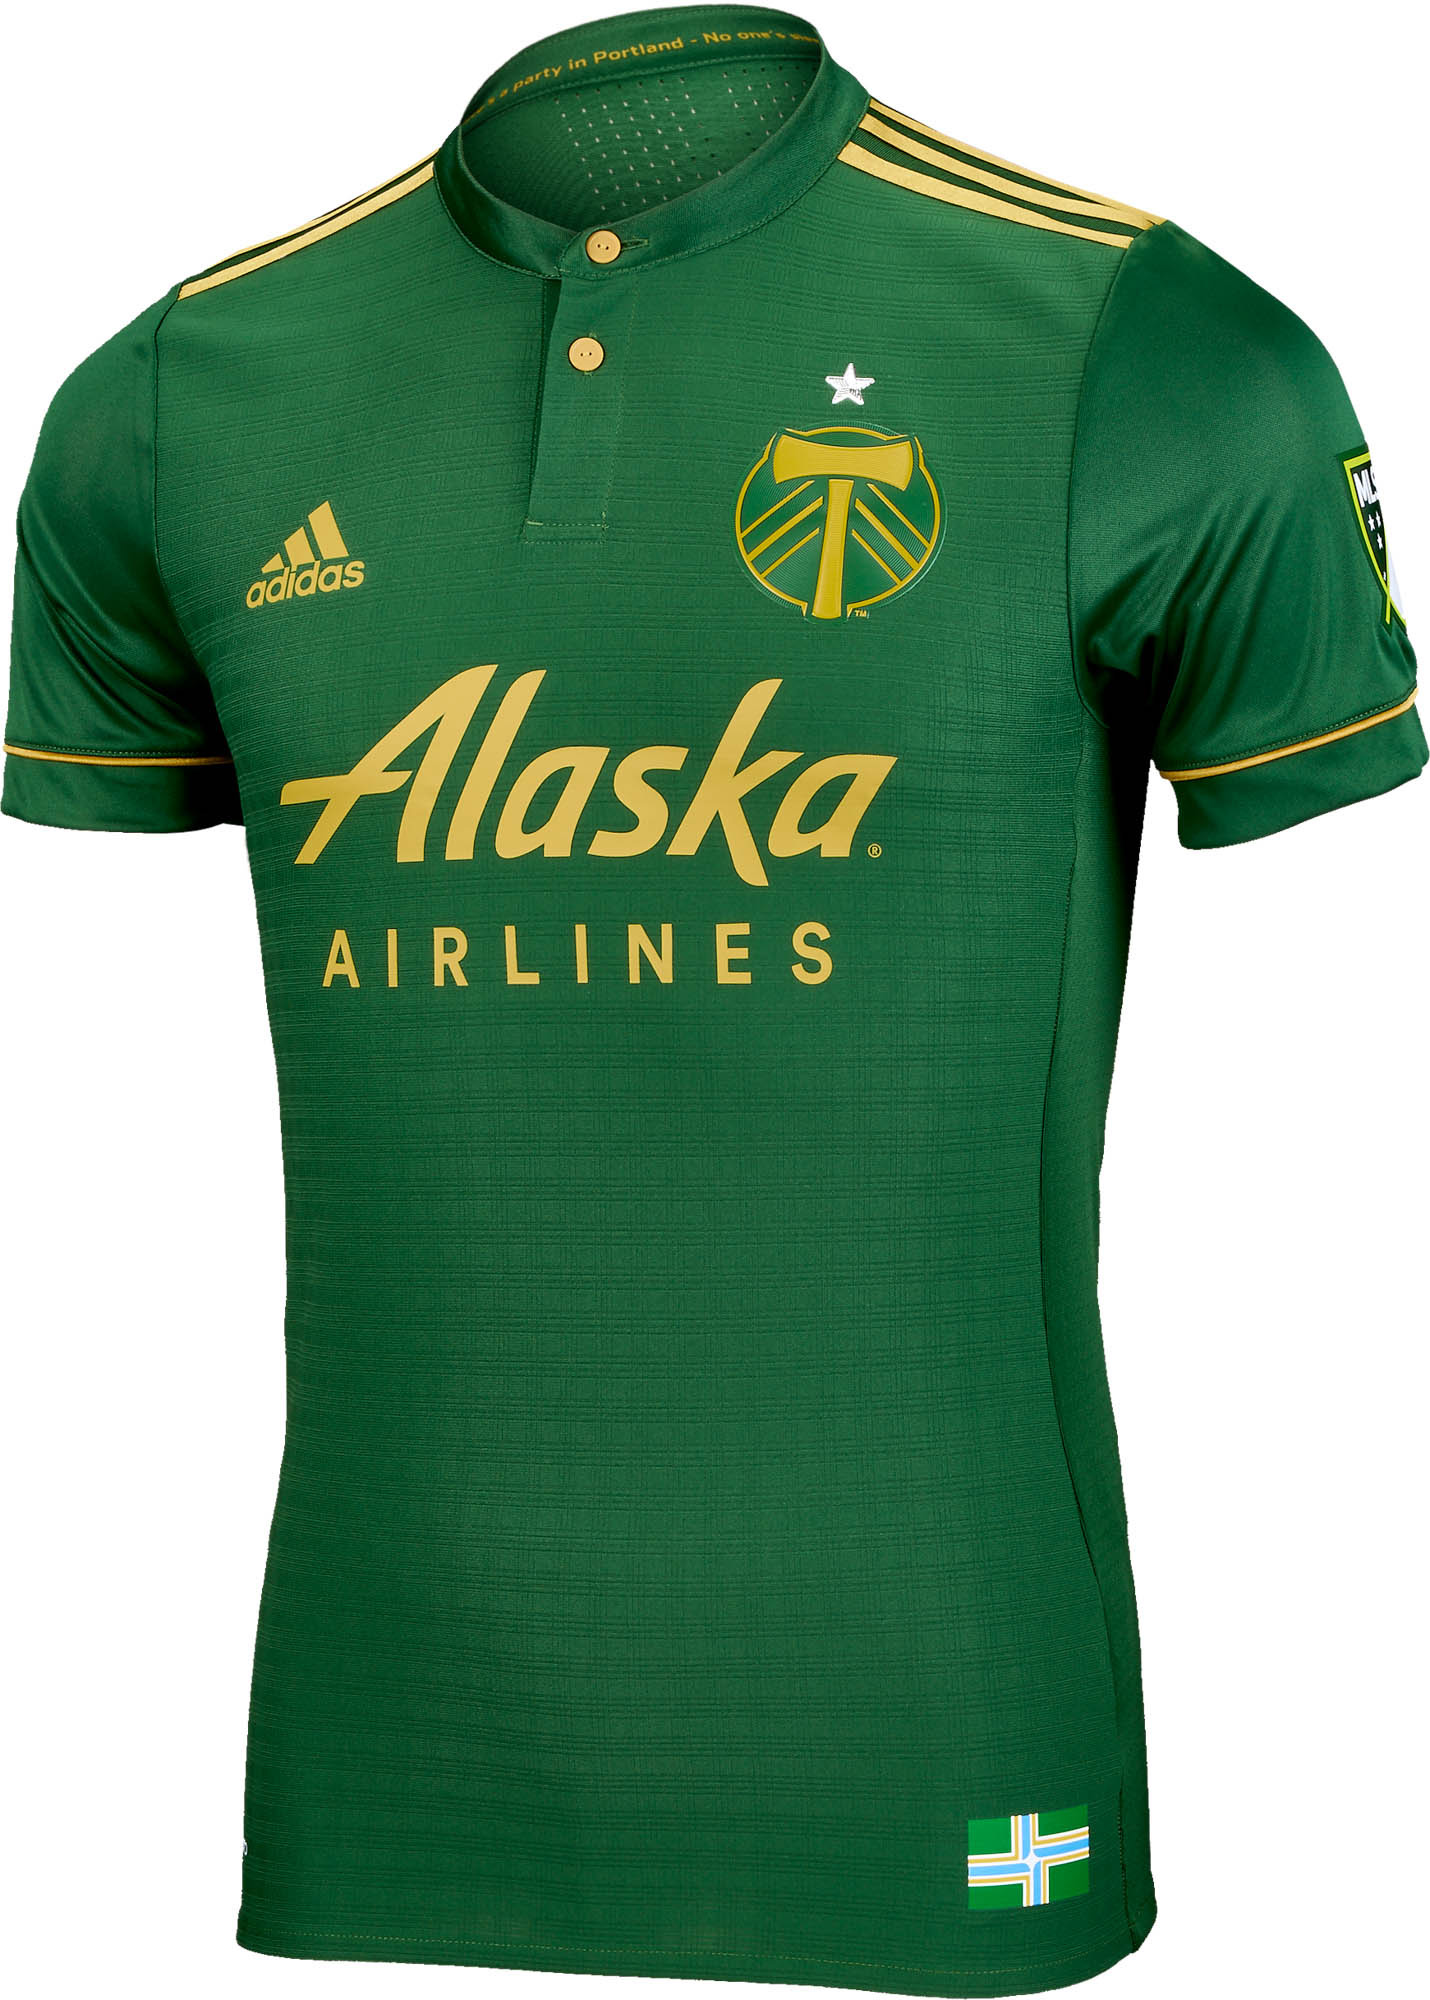 Frill Rendition Mania 2017/18 adidas Portland Timbers Authentic Home Jersey - SoccerPro.com